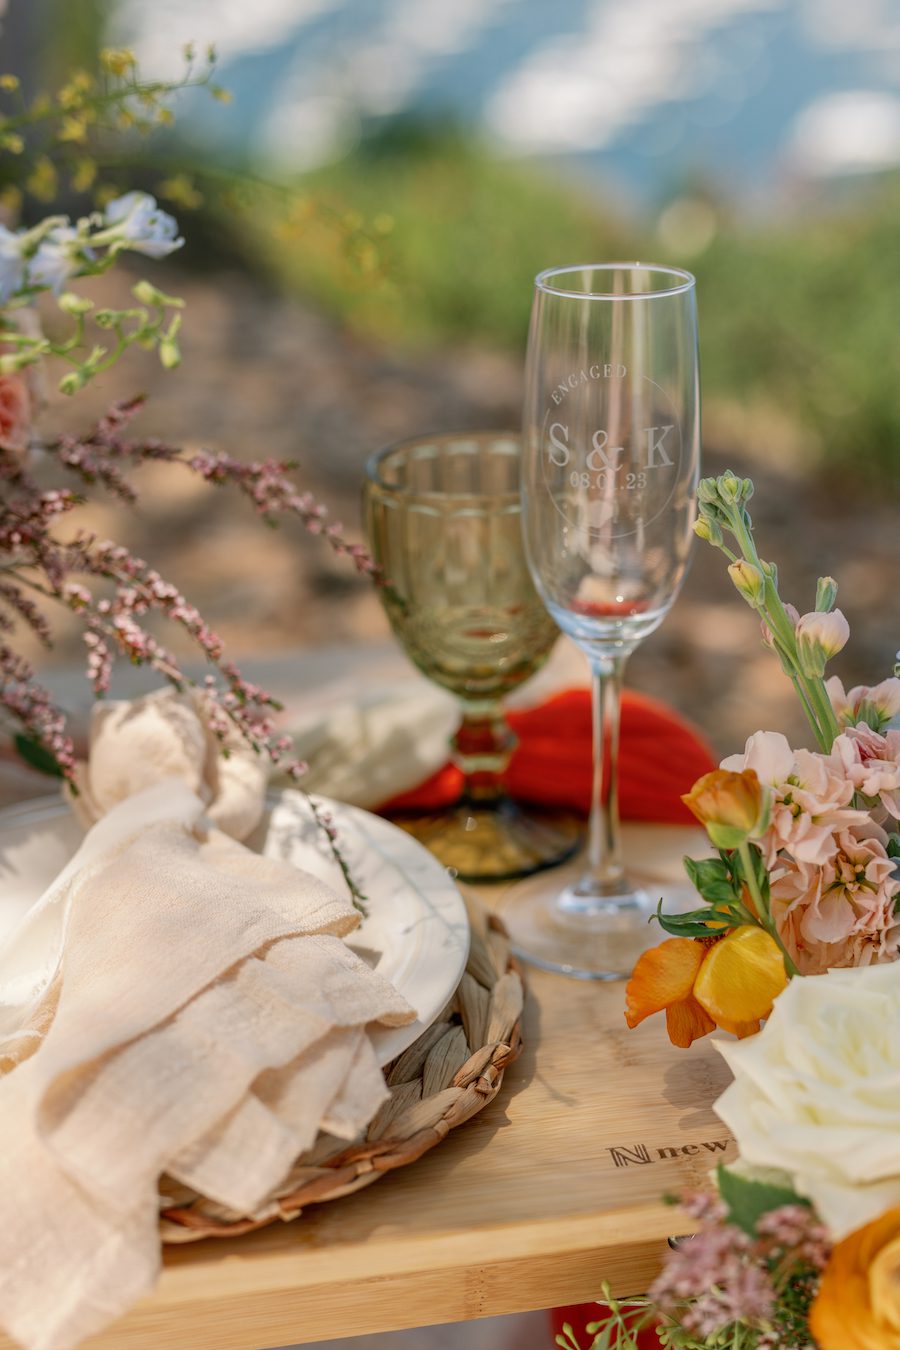 custom engraved champagne glasses from this private picnic proposal on Catalina Island